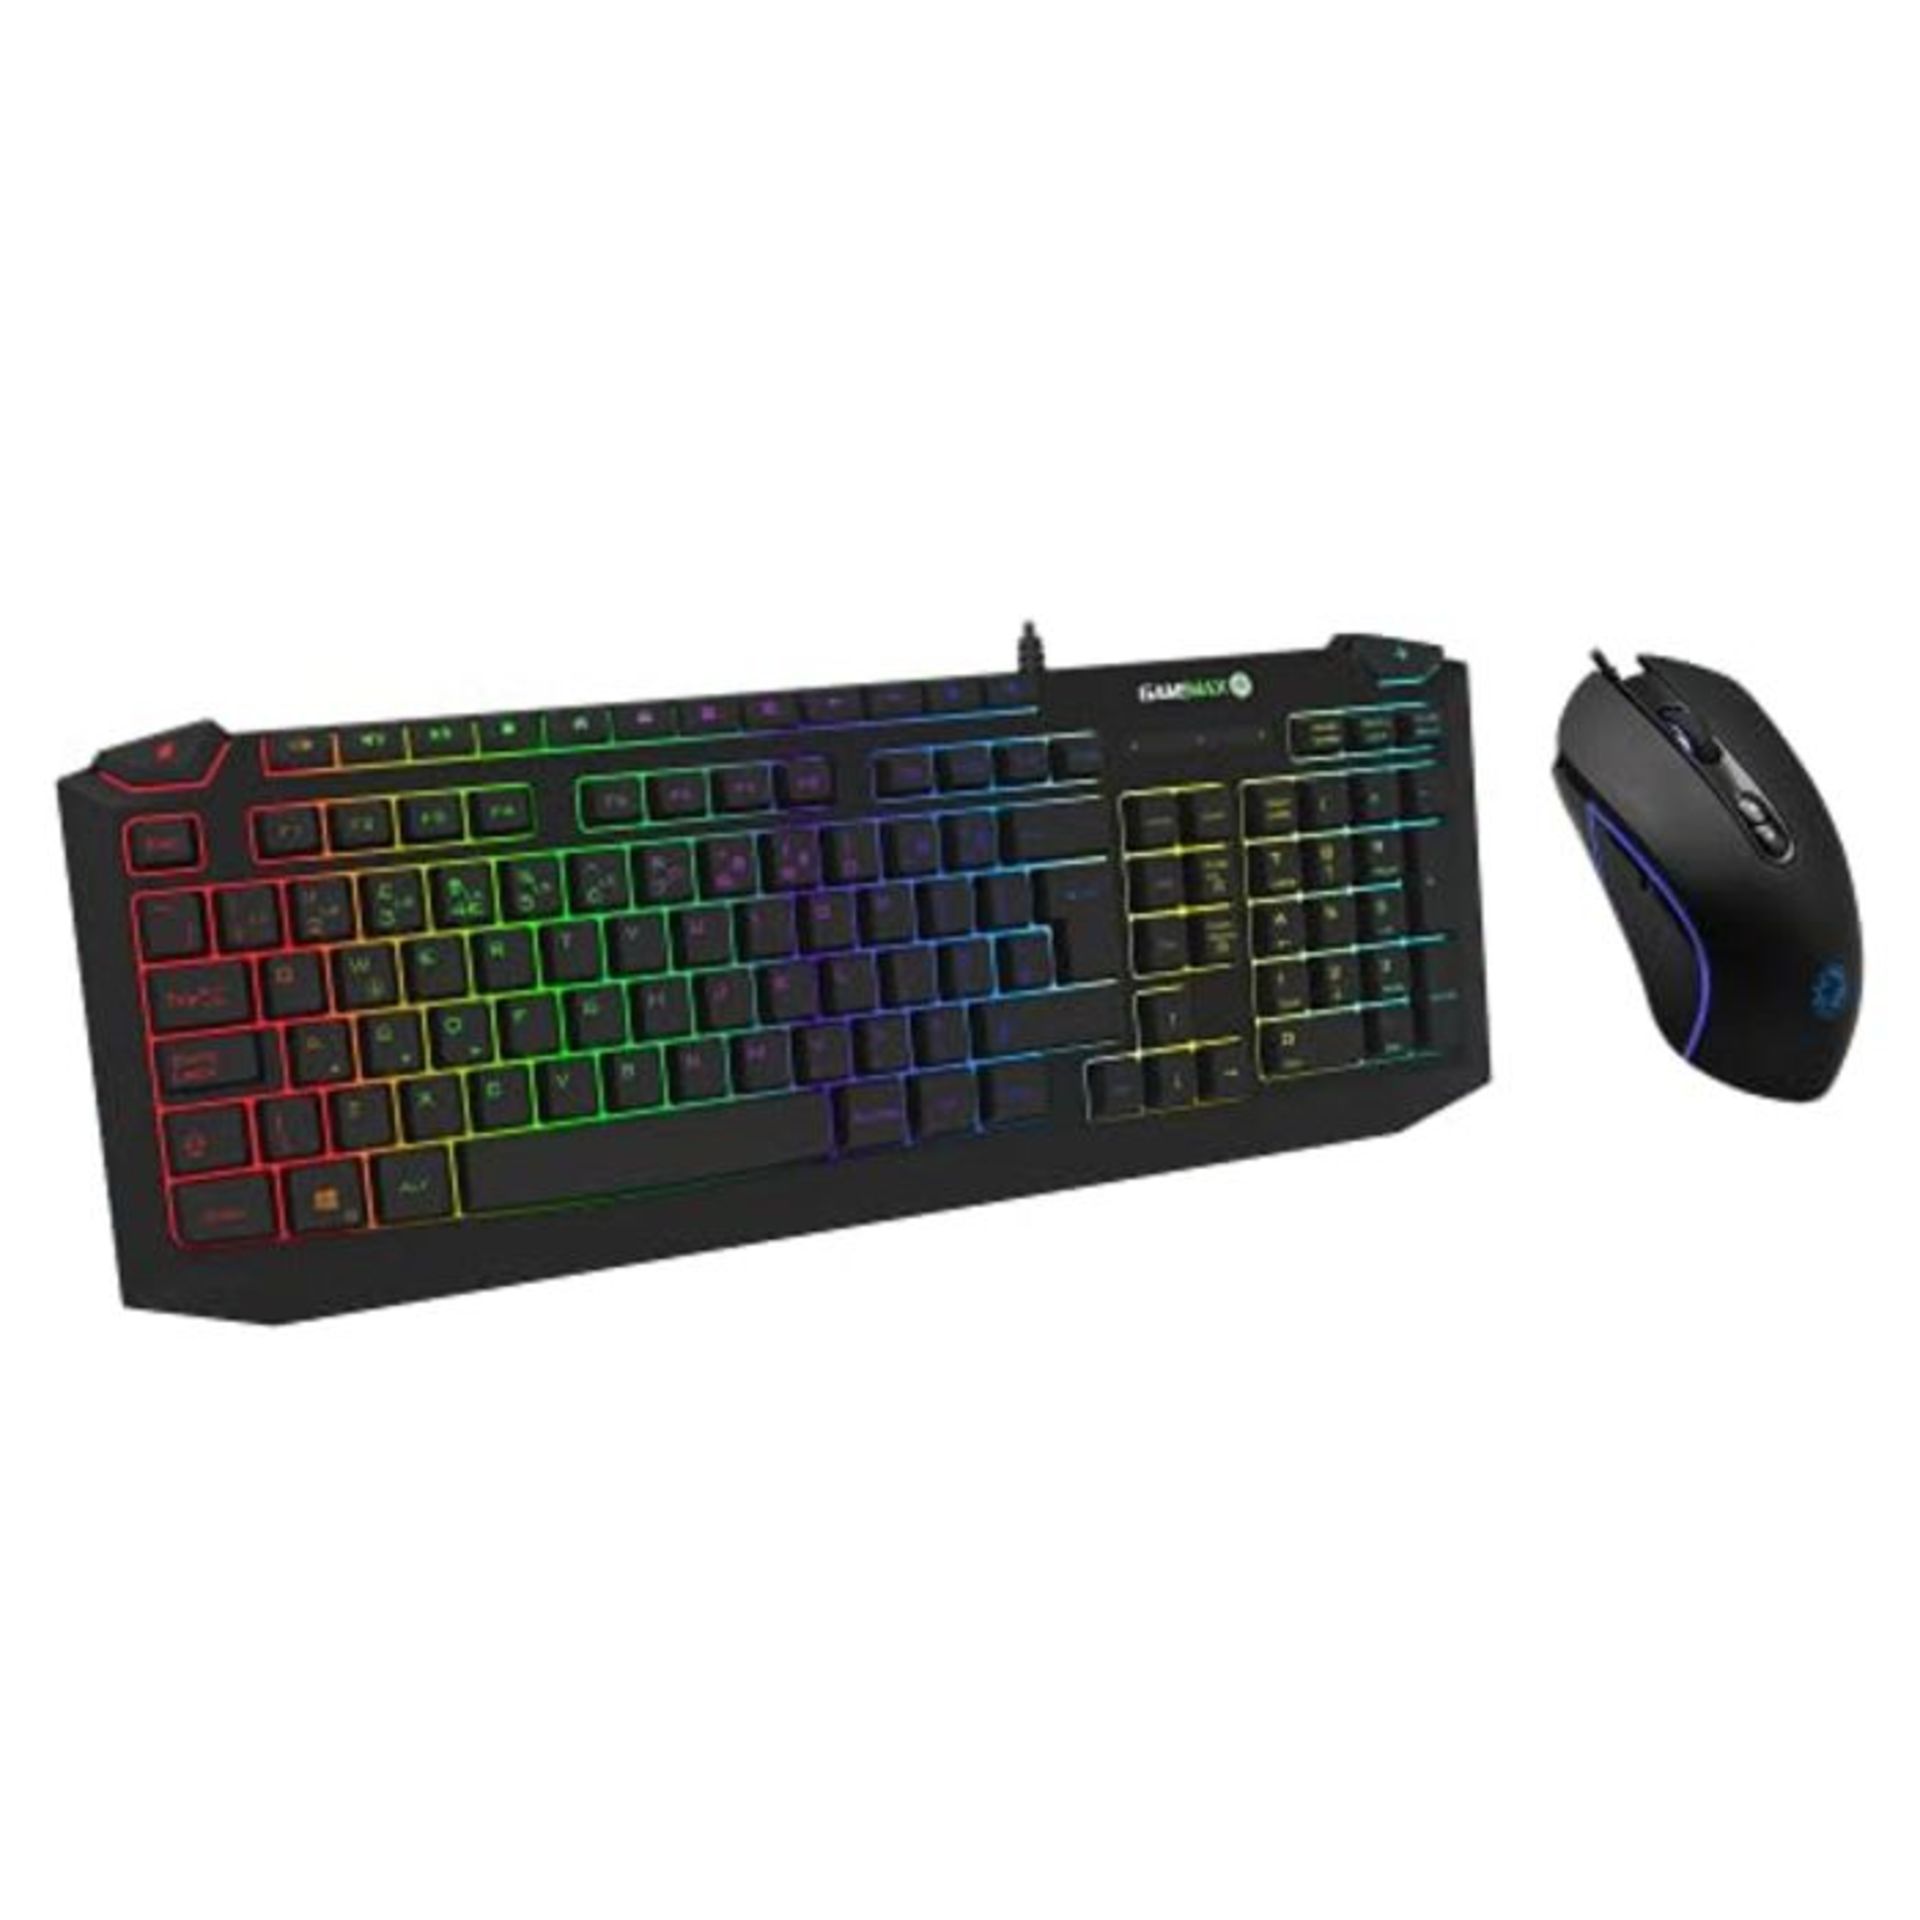 GameMax Pulse RGB Gaming Keyboard & Mouse, 7 Colour LED Backlight, 7D Optical, Anti-Gh